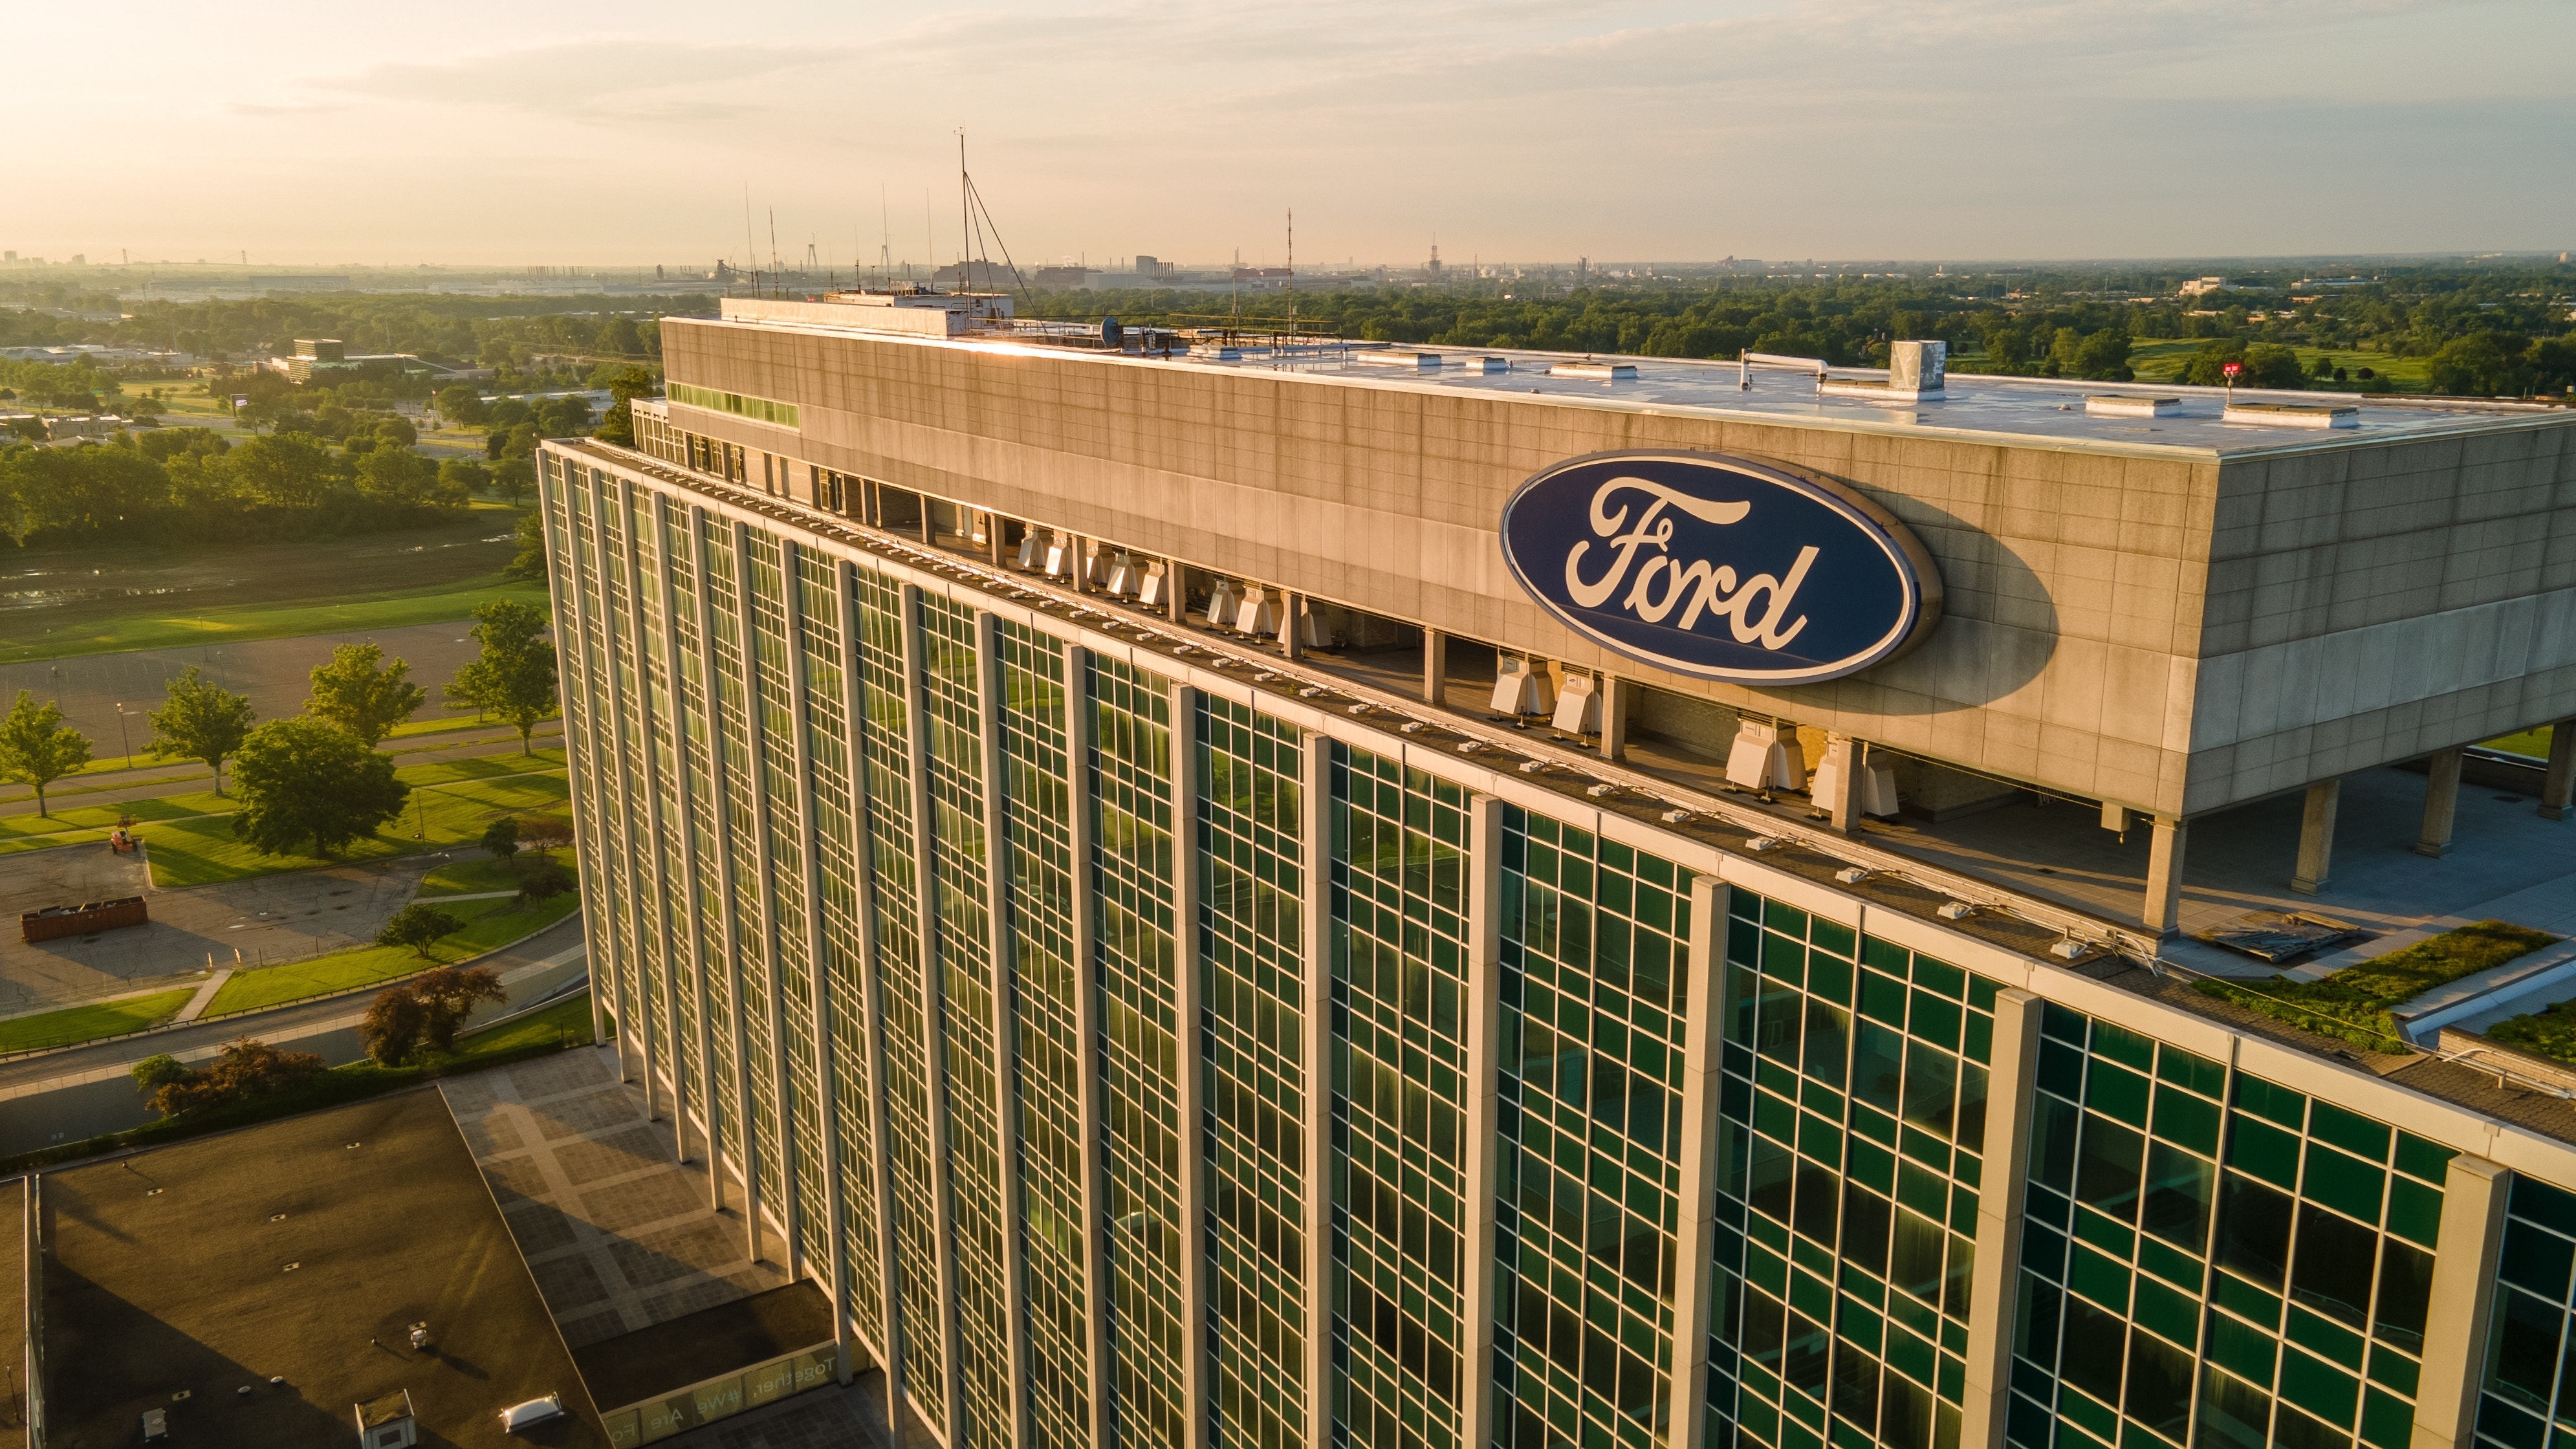 Ford Rallies Off GM's Q4 Success: 'Consumers Are Still Buying Cars'